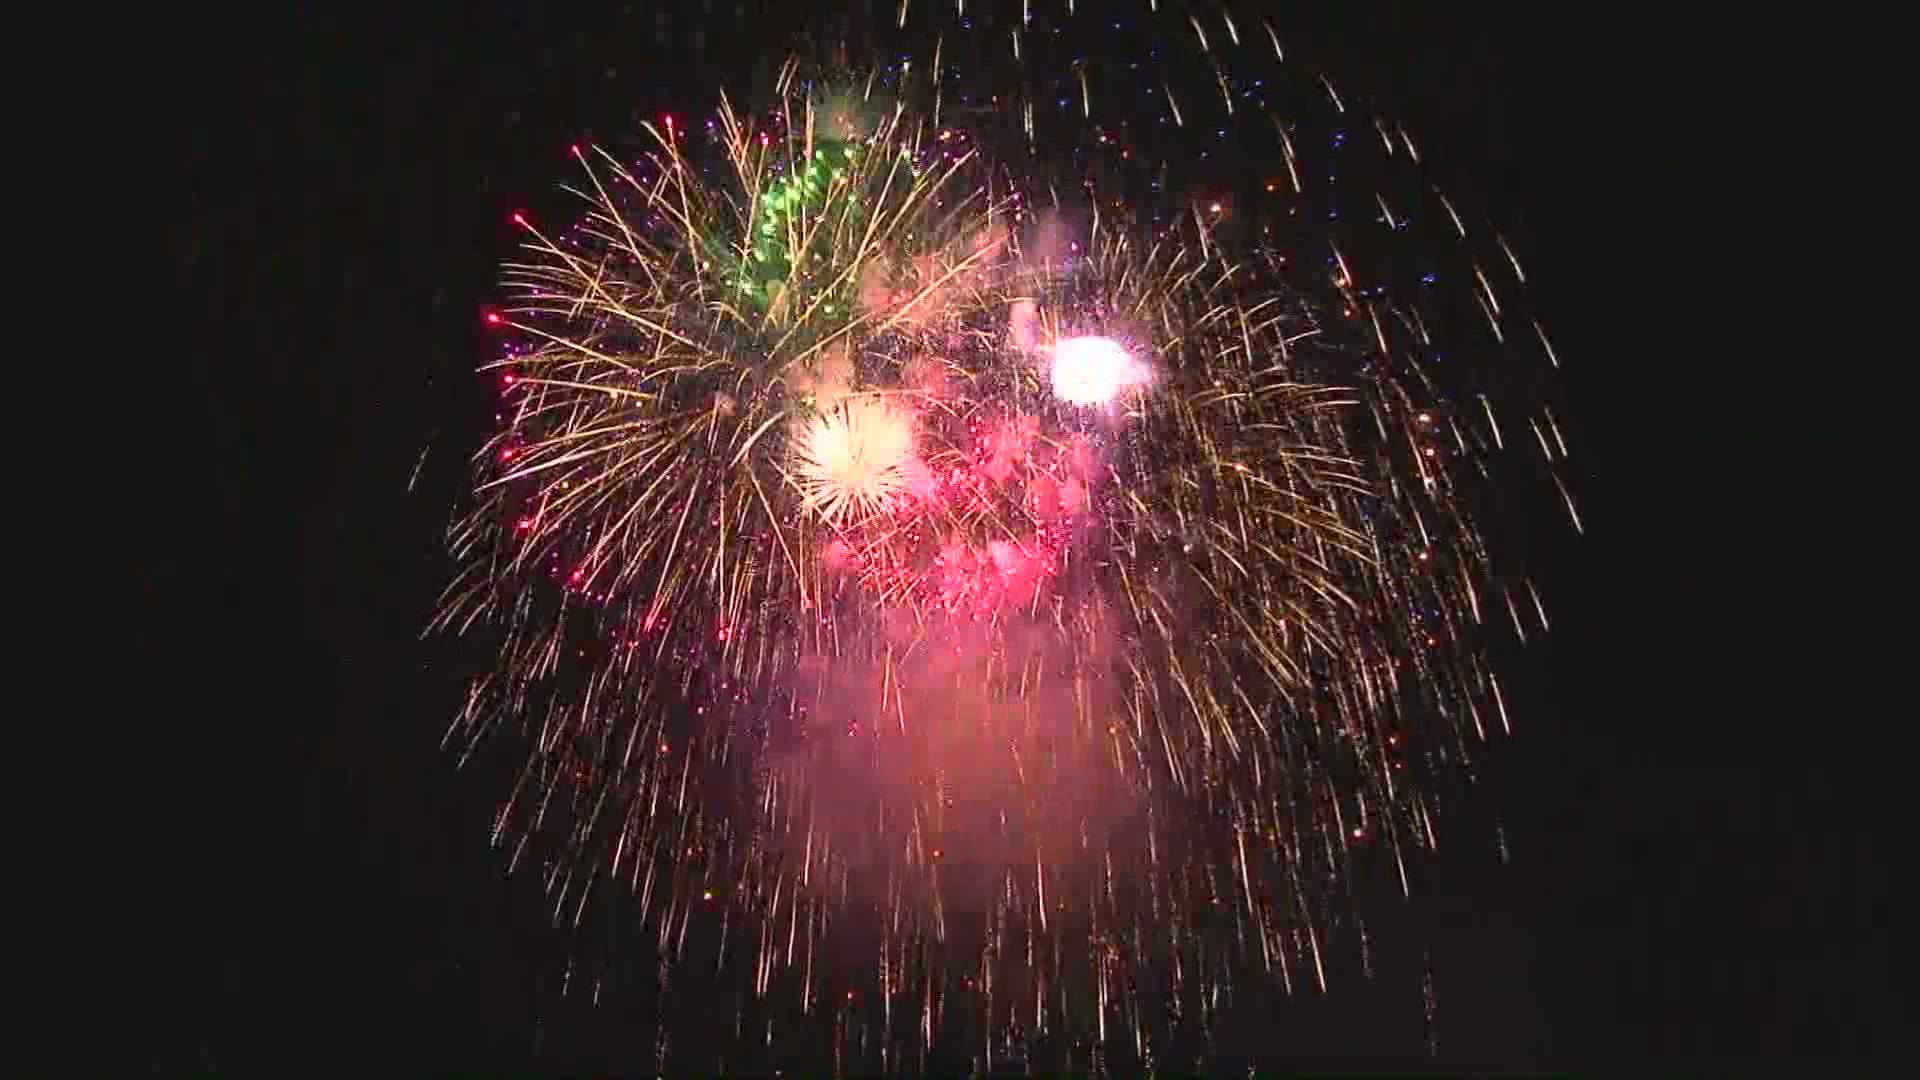 The Independence Day fireworks show at Segra Park was held on July 3, 2021 in Columbia, South Carolina. The South Carolina Philharmonic provided the music.